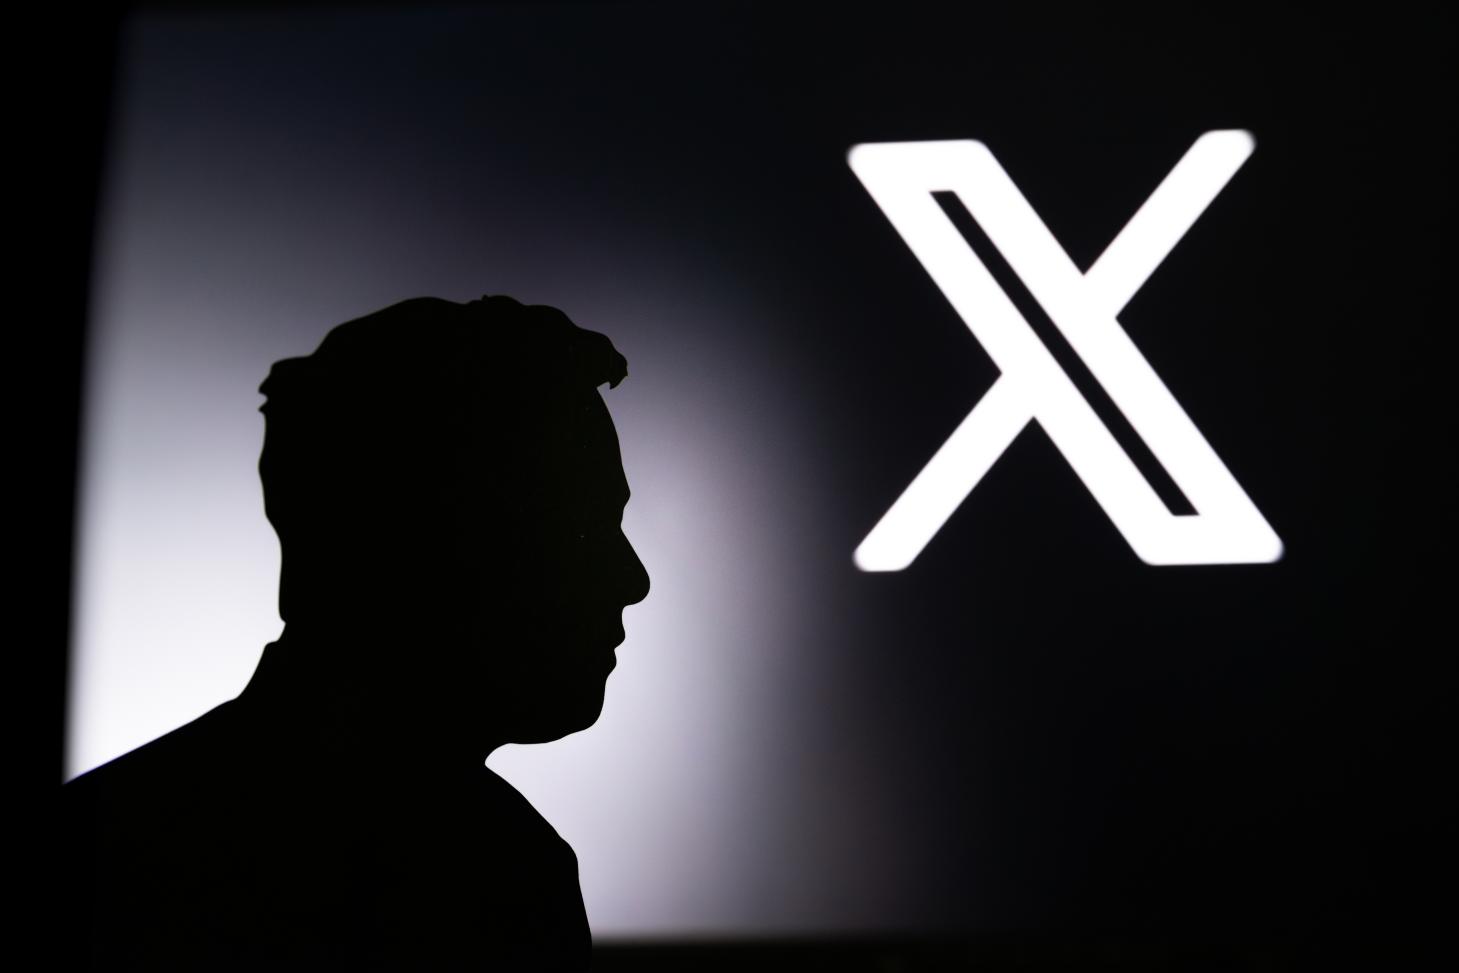 A silhouette of Elon Musk and the X logo